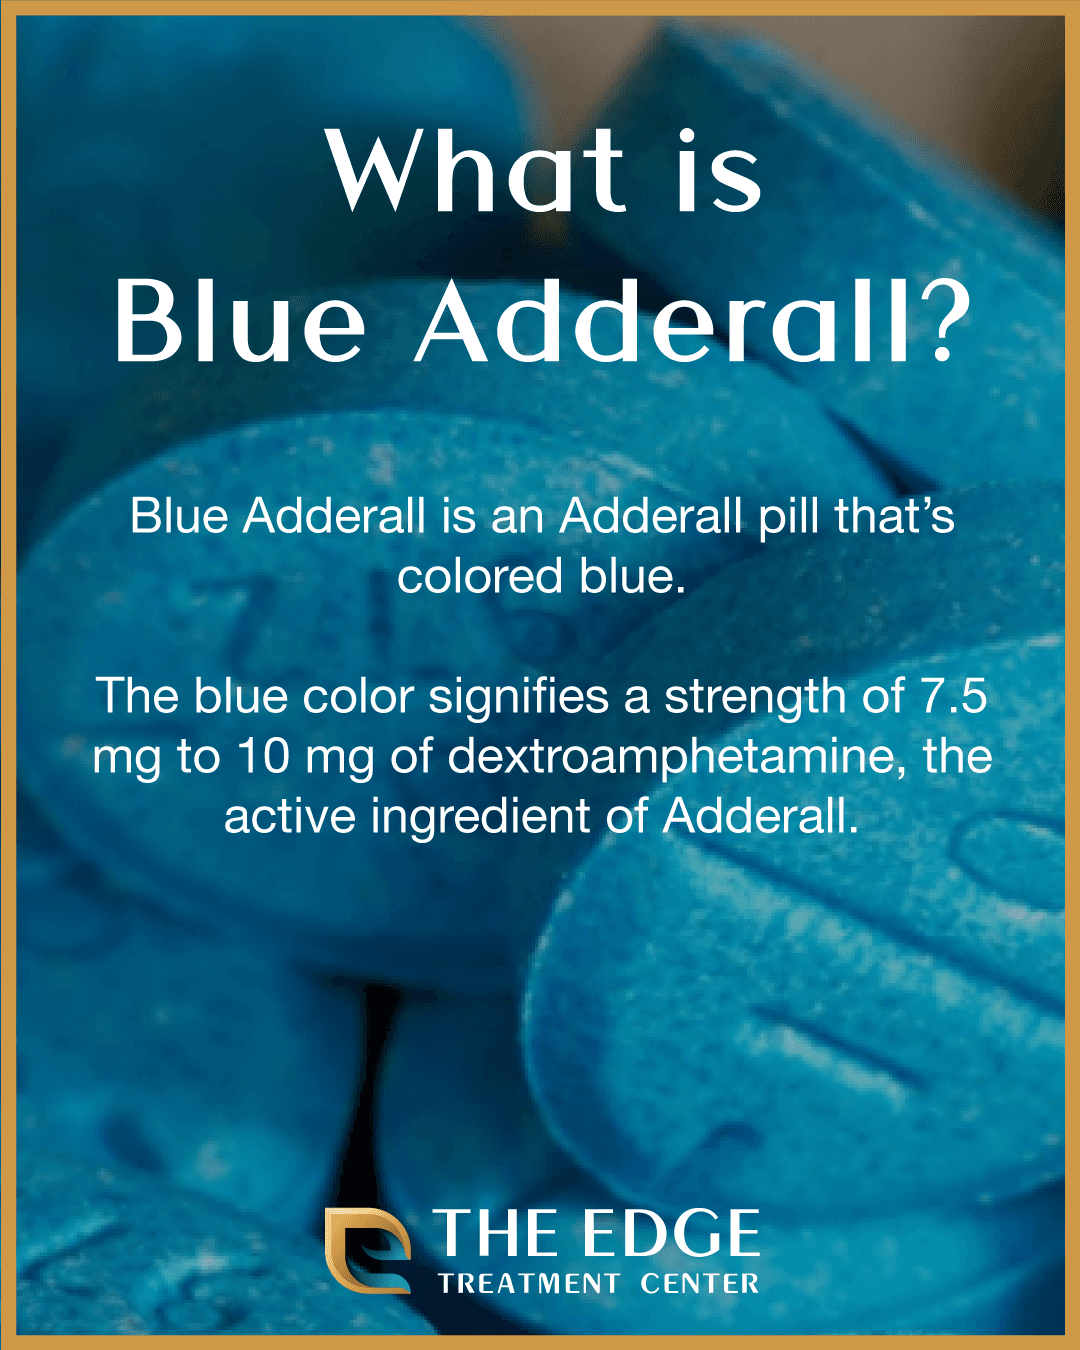 What is Blue Adderall?